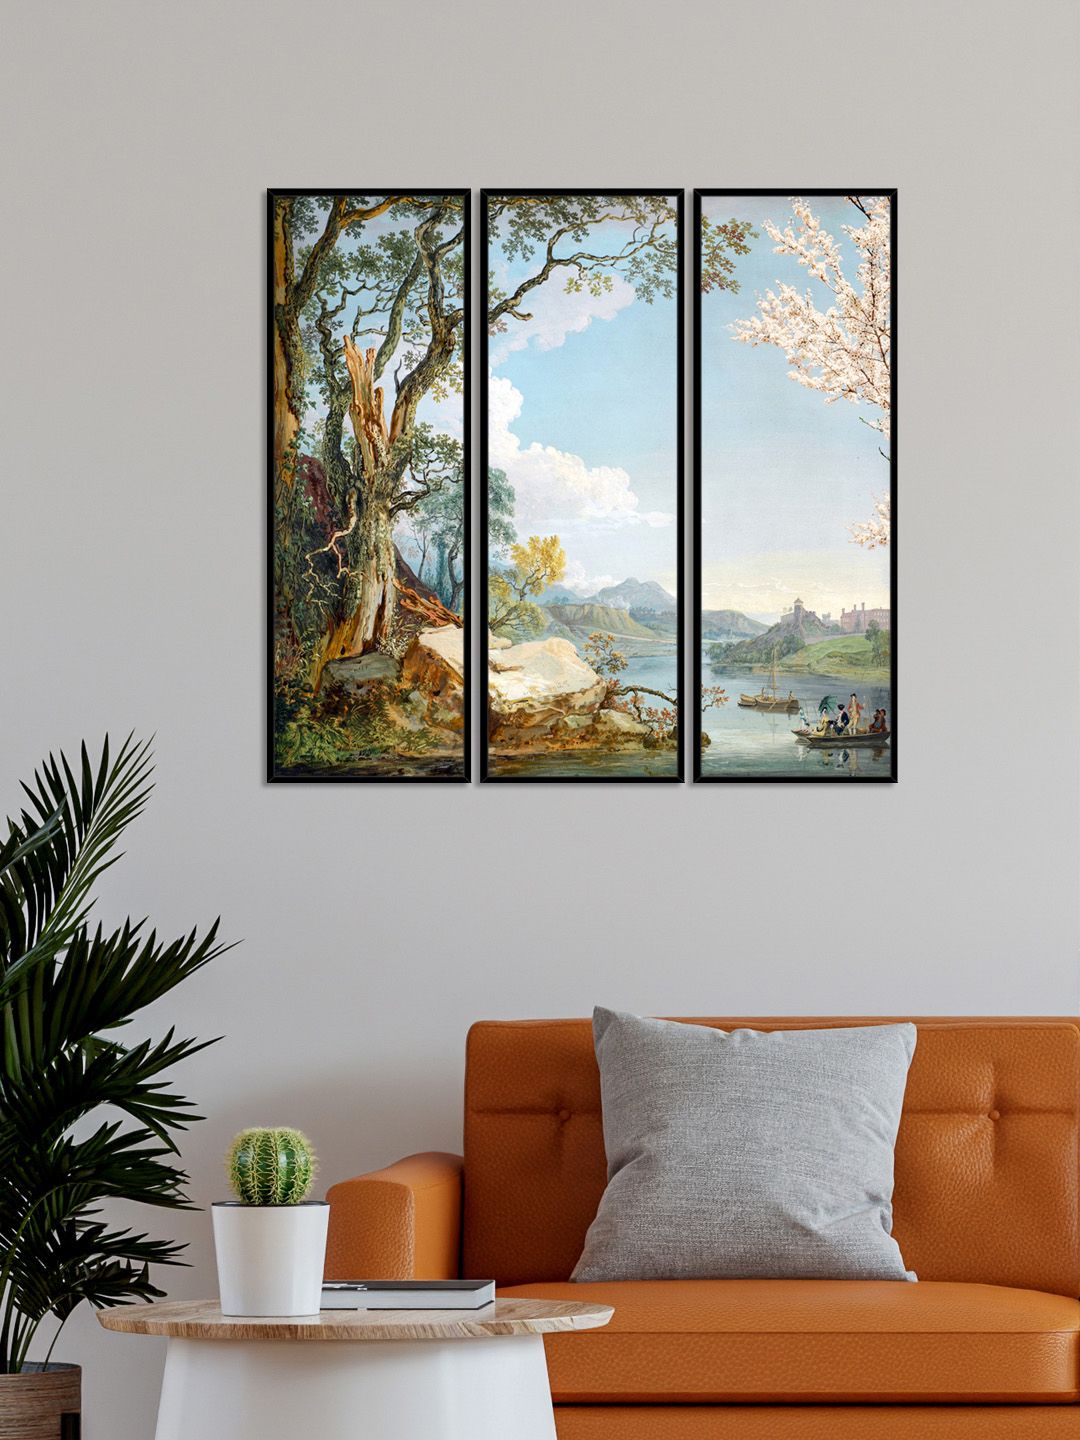 999Store Set Of 3 Blue & Green Beautiful Nature View Painting Framed Wall Art Price in India